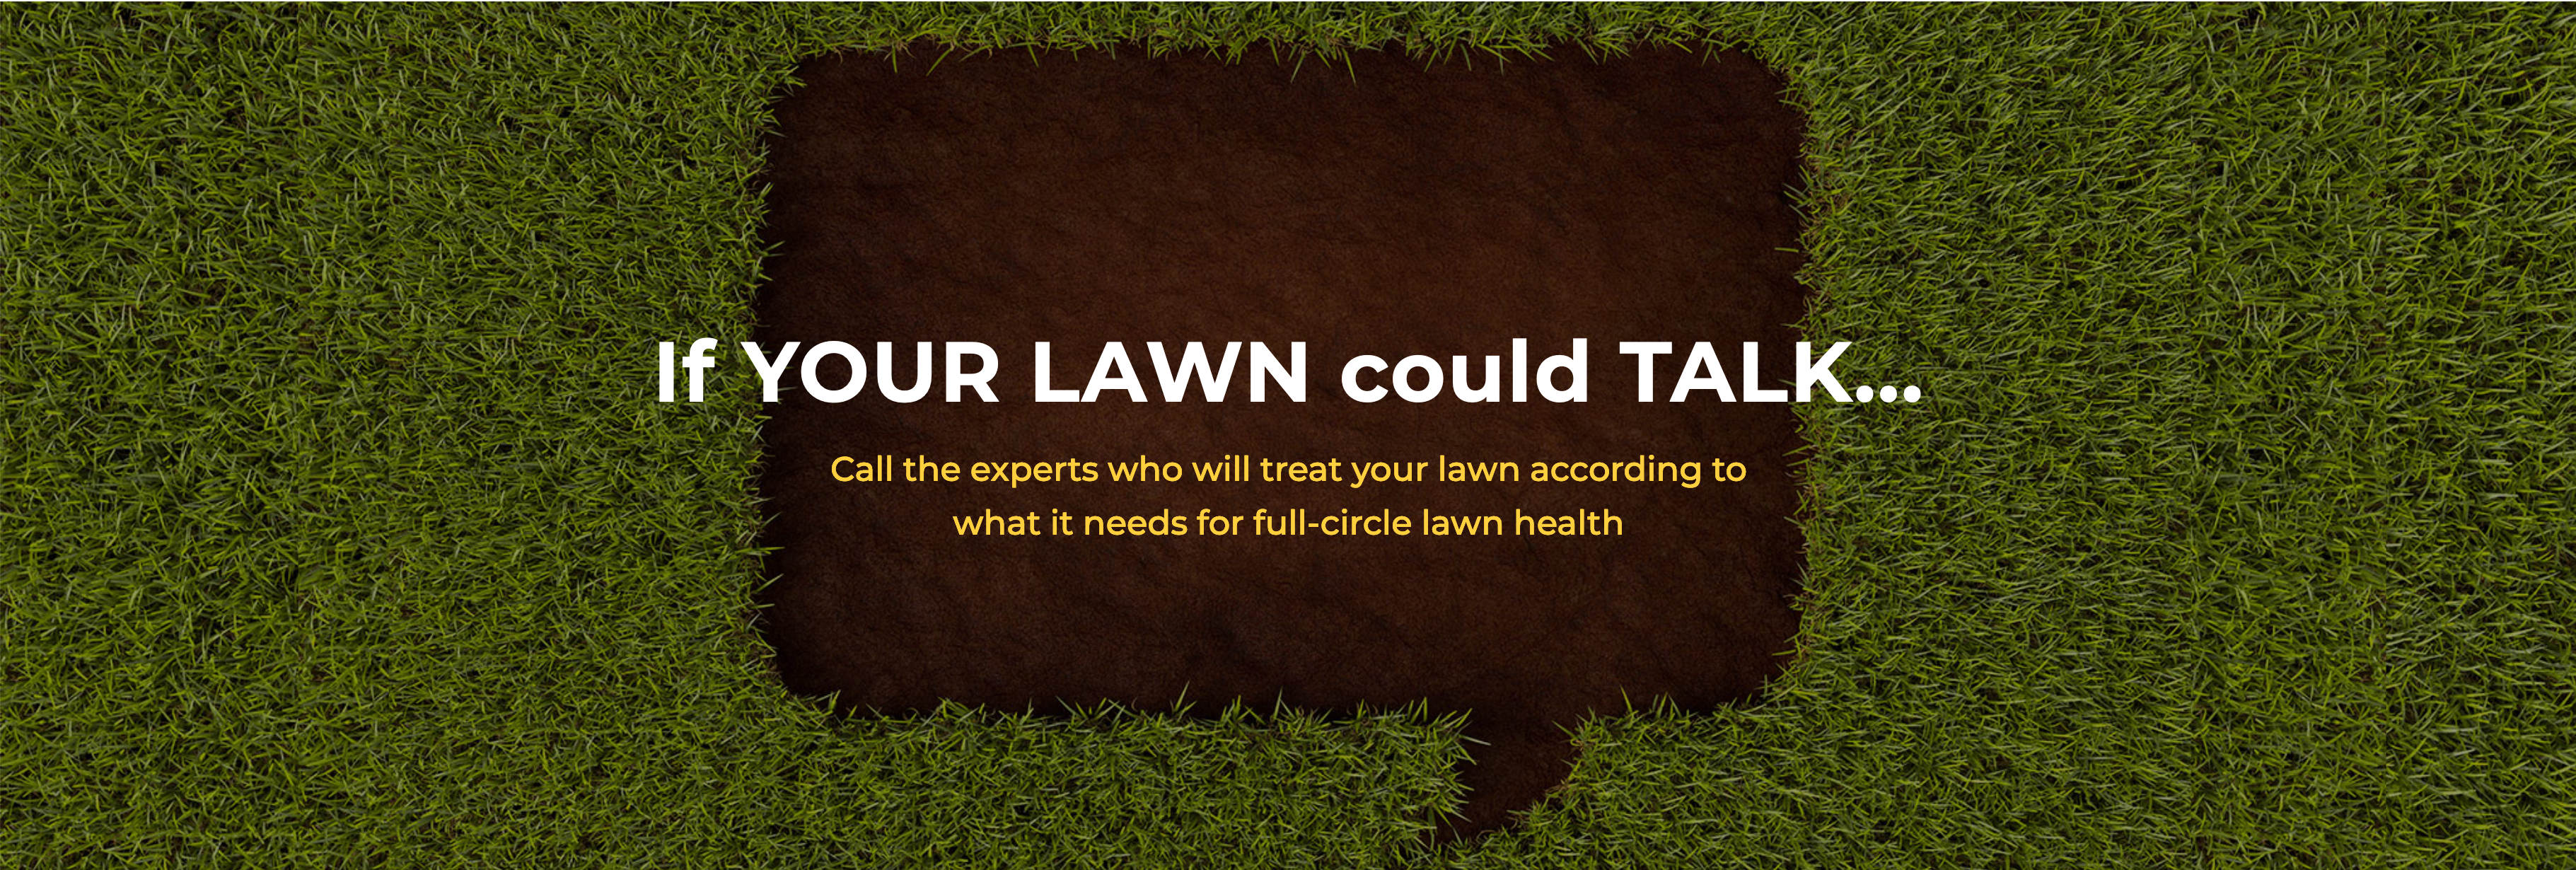 For a healthy lawn, call THRIVE!